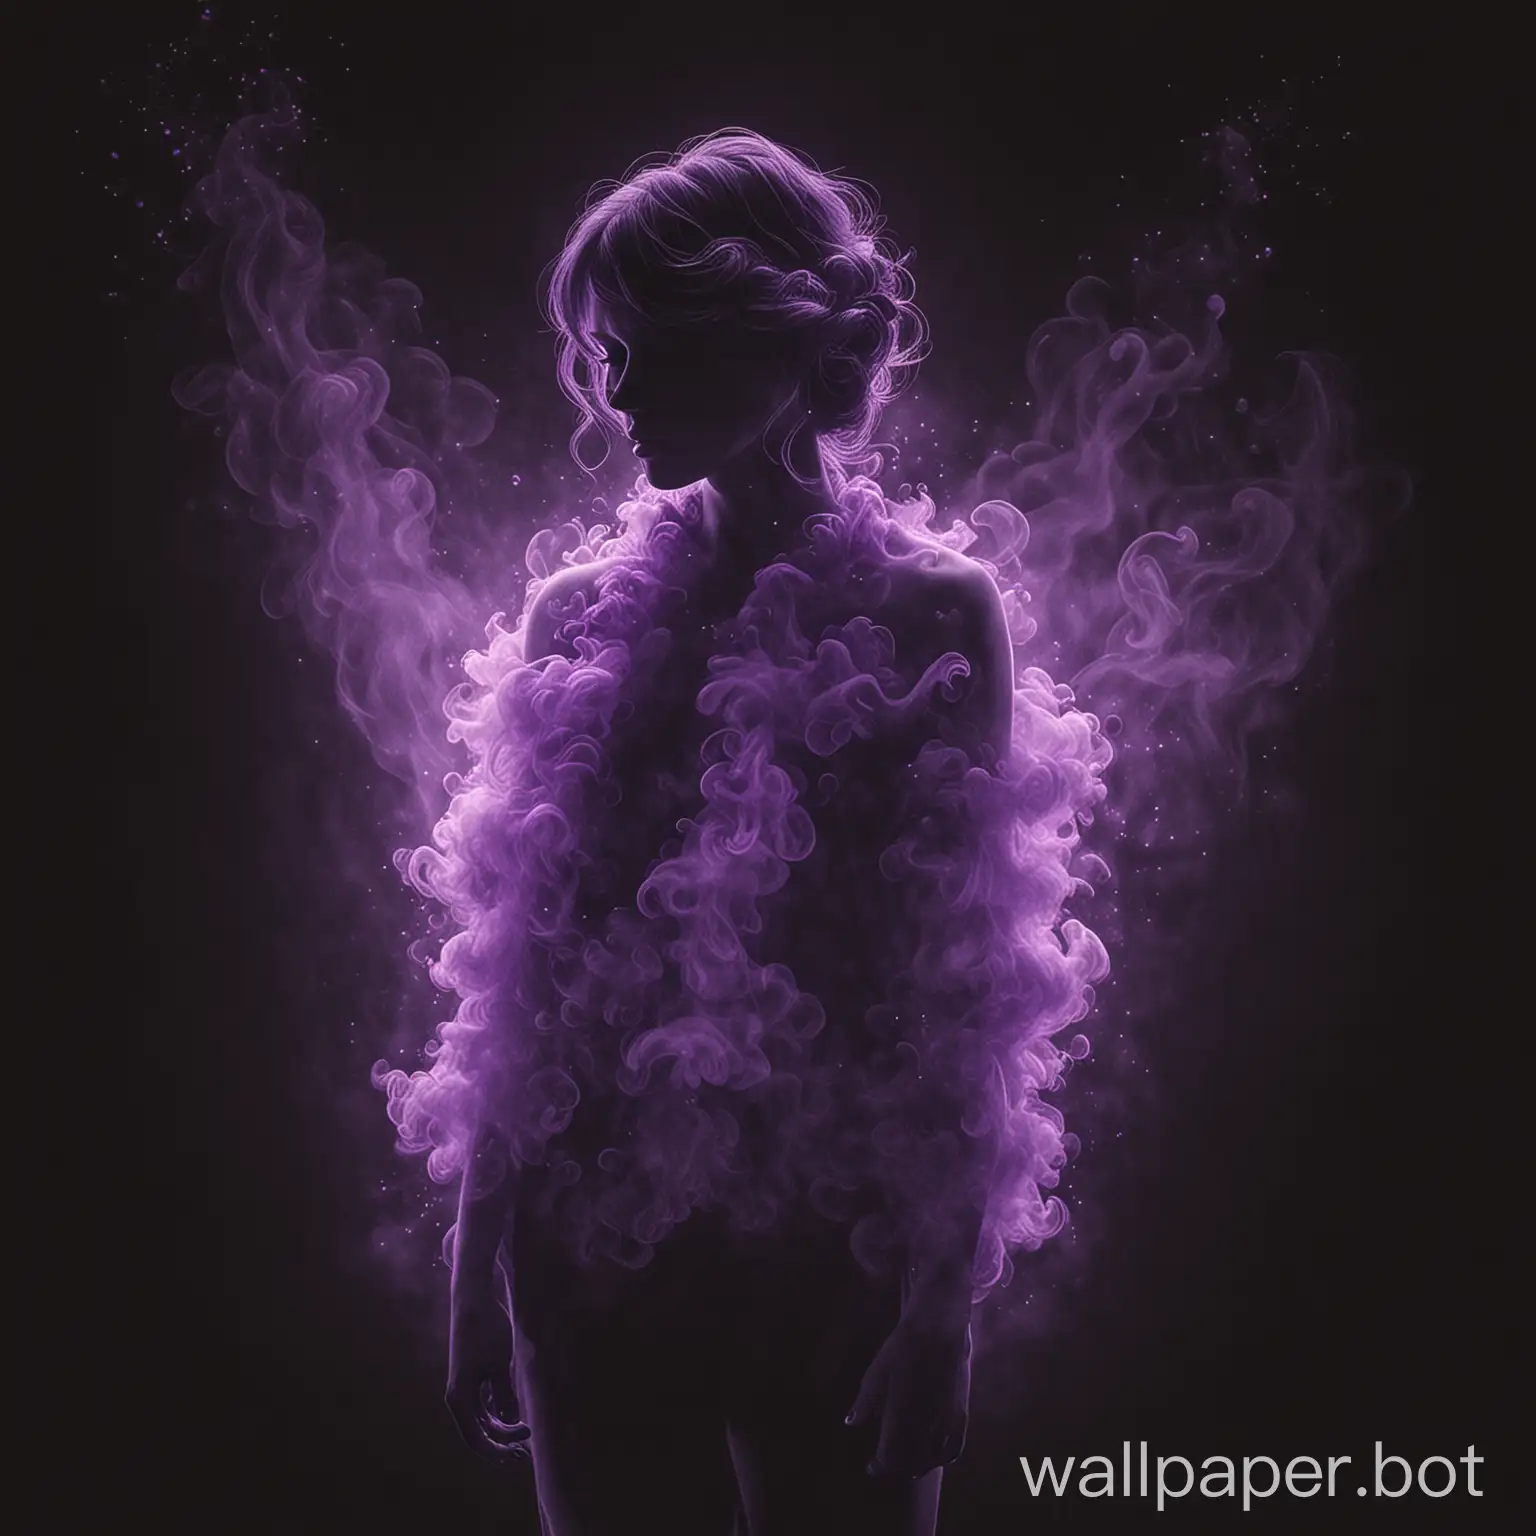 Draw a cluster of purple mist in the shape of a person on a black background.